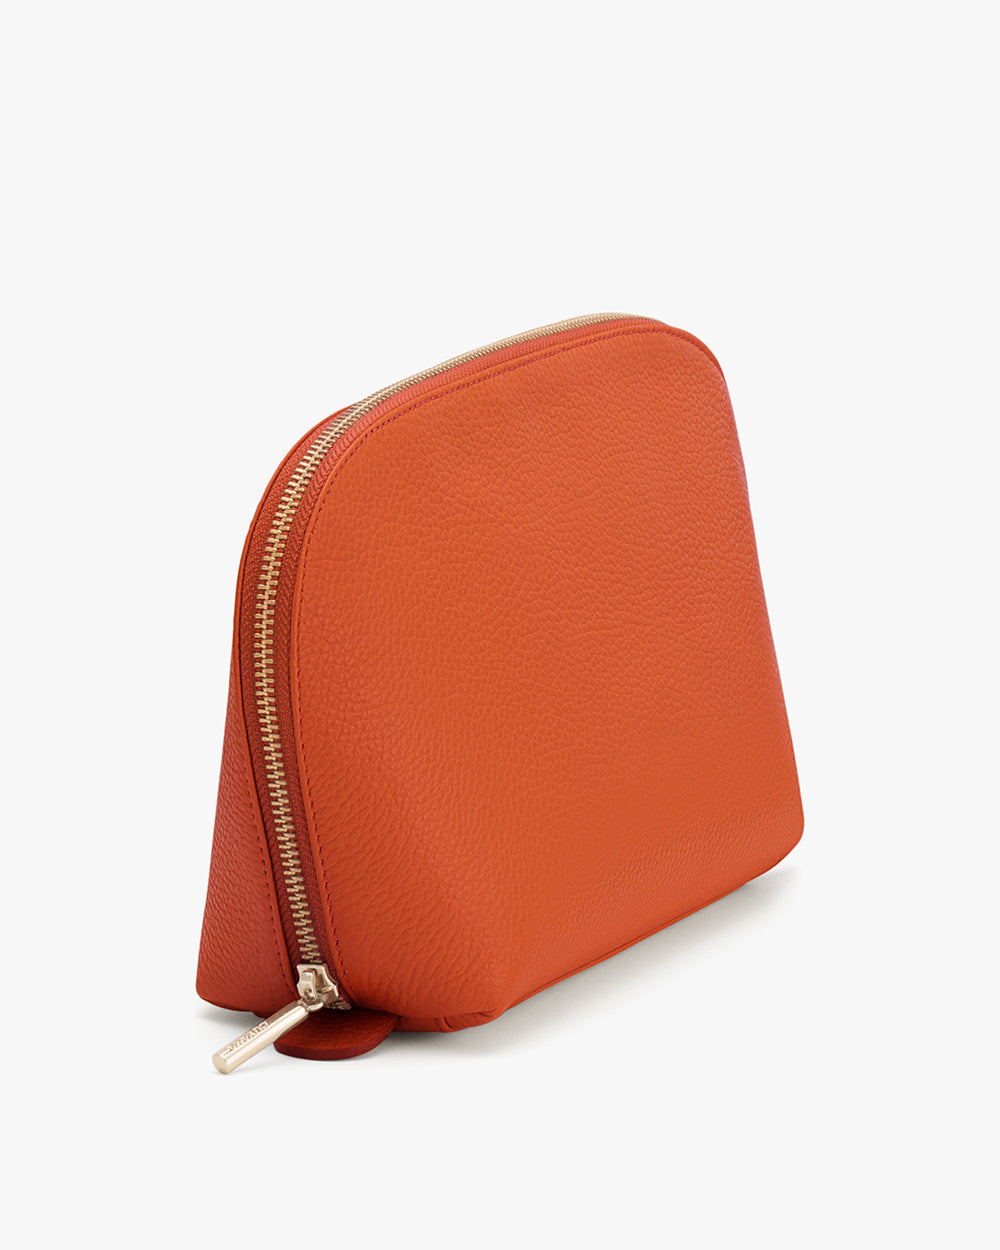 Small zipped pouch standing upright